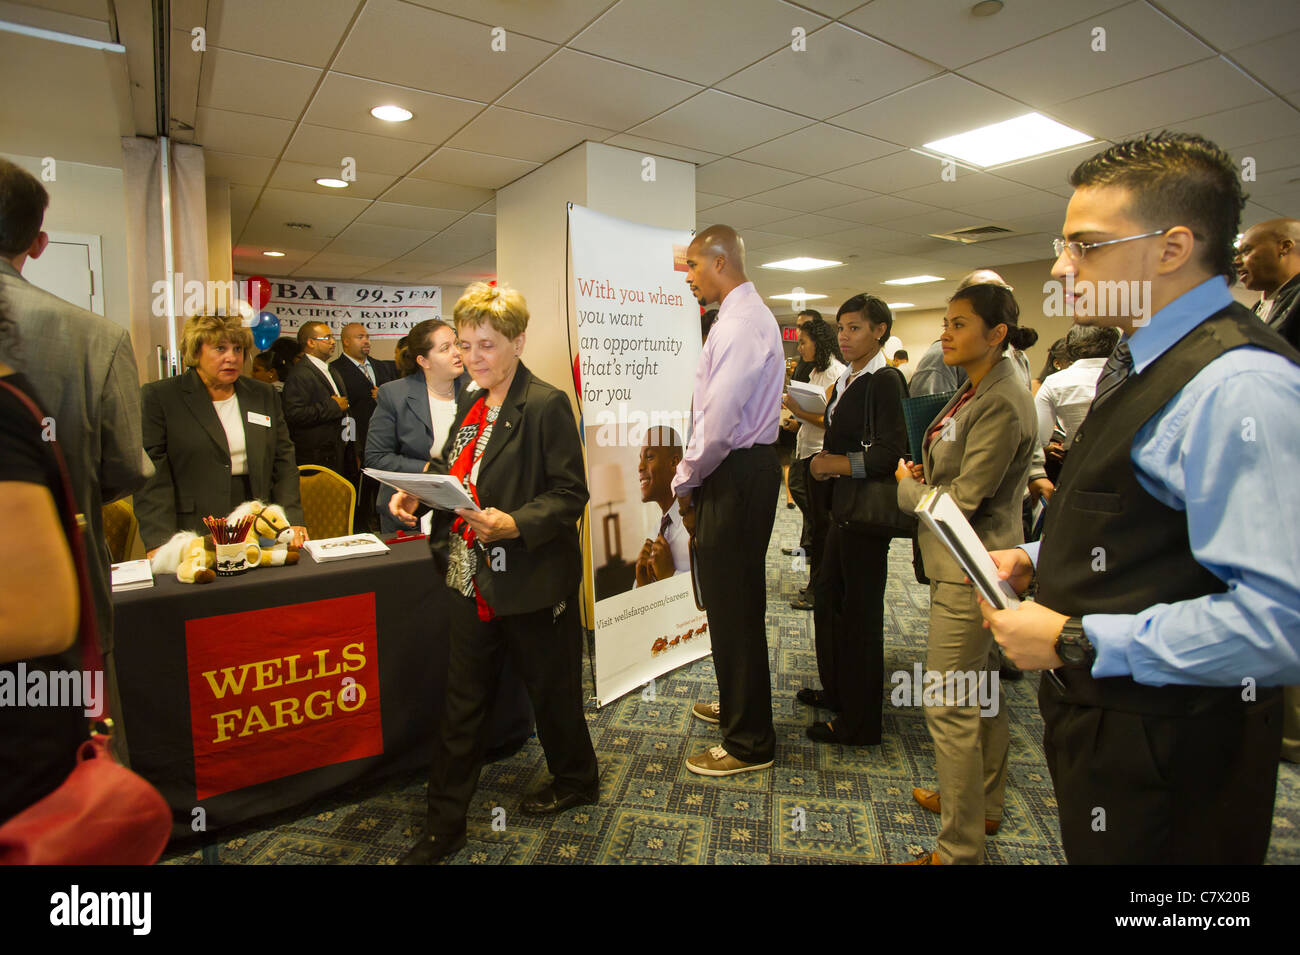 Job seekers attend a job fair in midtown in New York on Friday, September 30, 2011. ( © Frances M. Roberts) Stock Photo